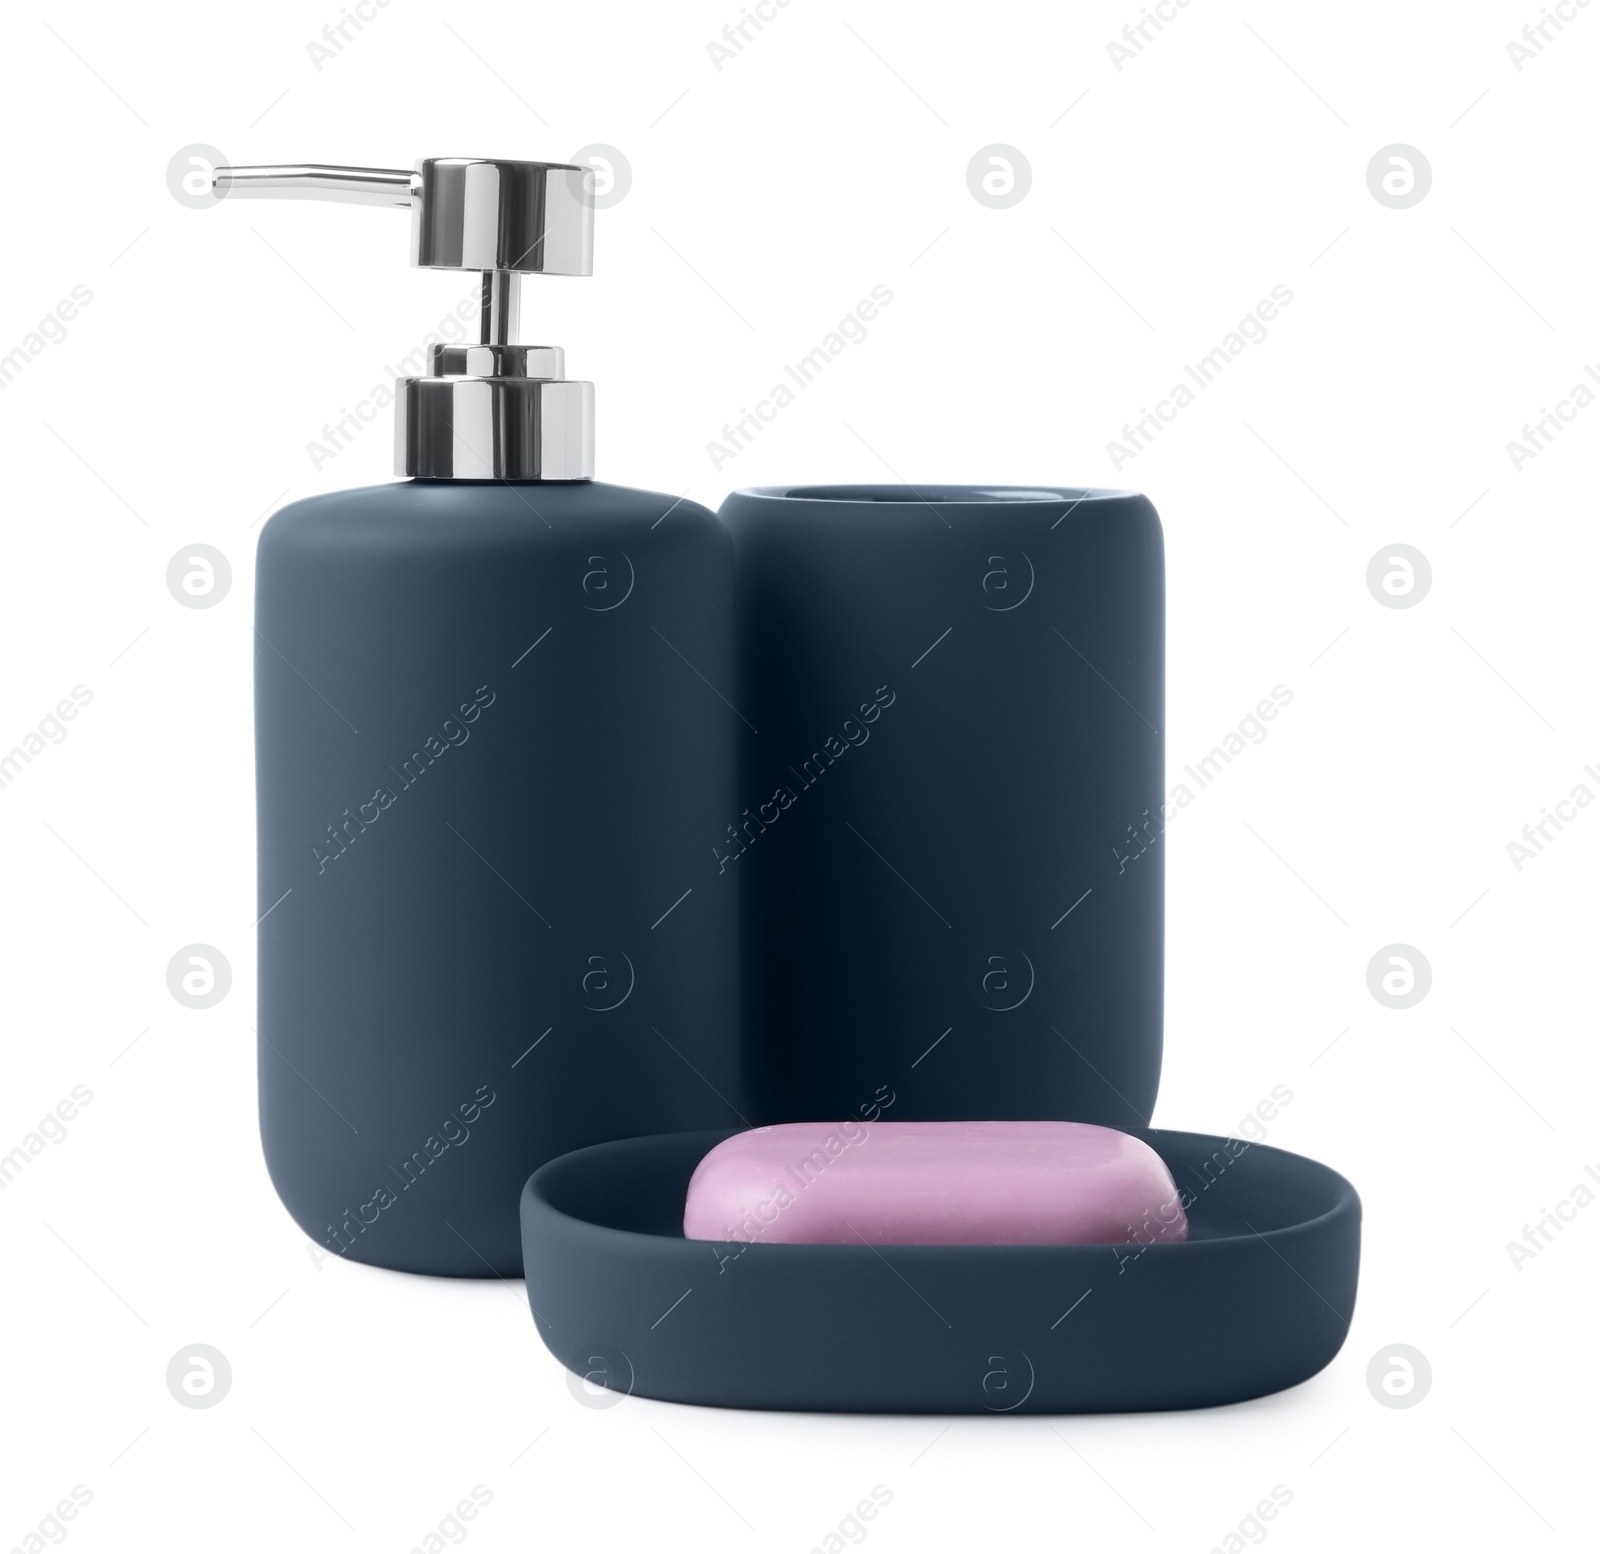 Photo of Set of bath accessories and soap bar isolated on white